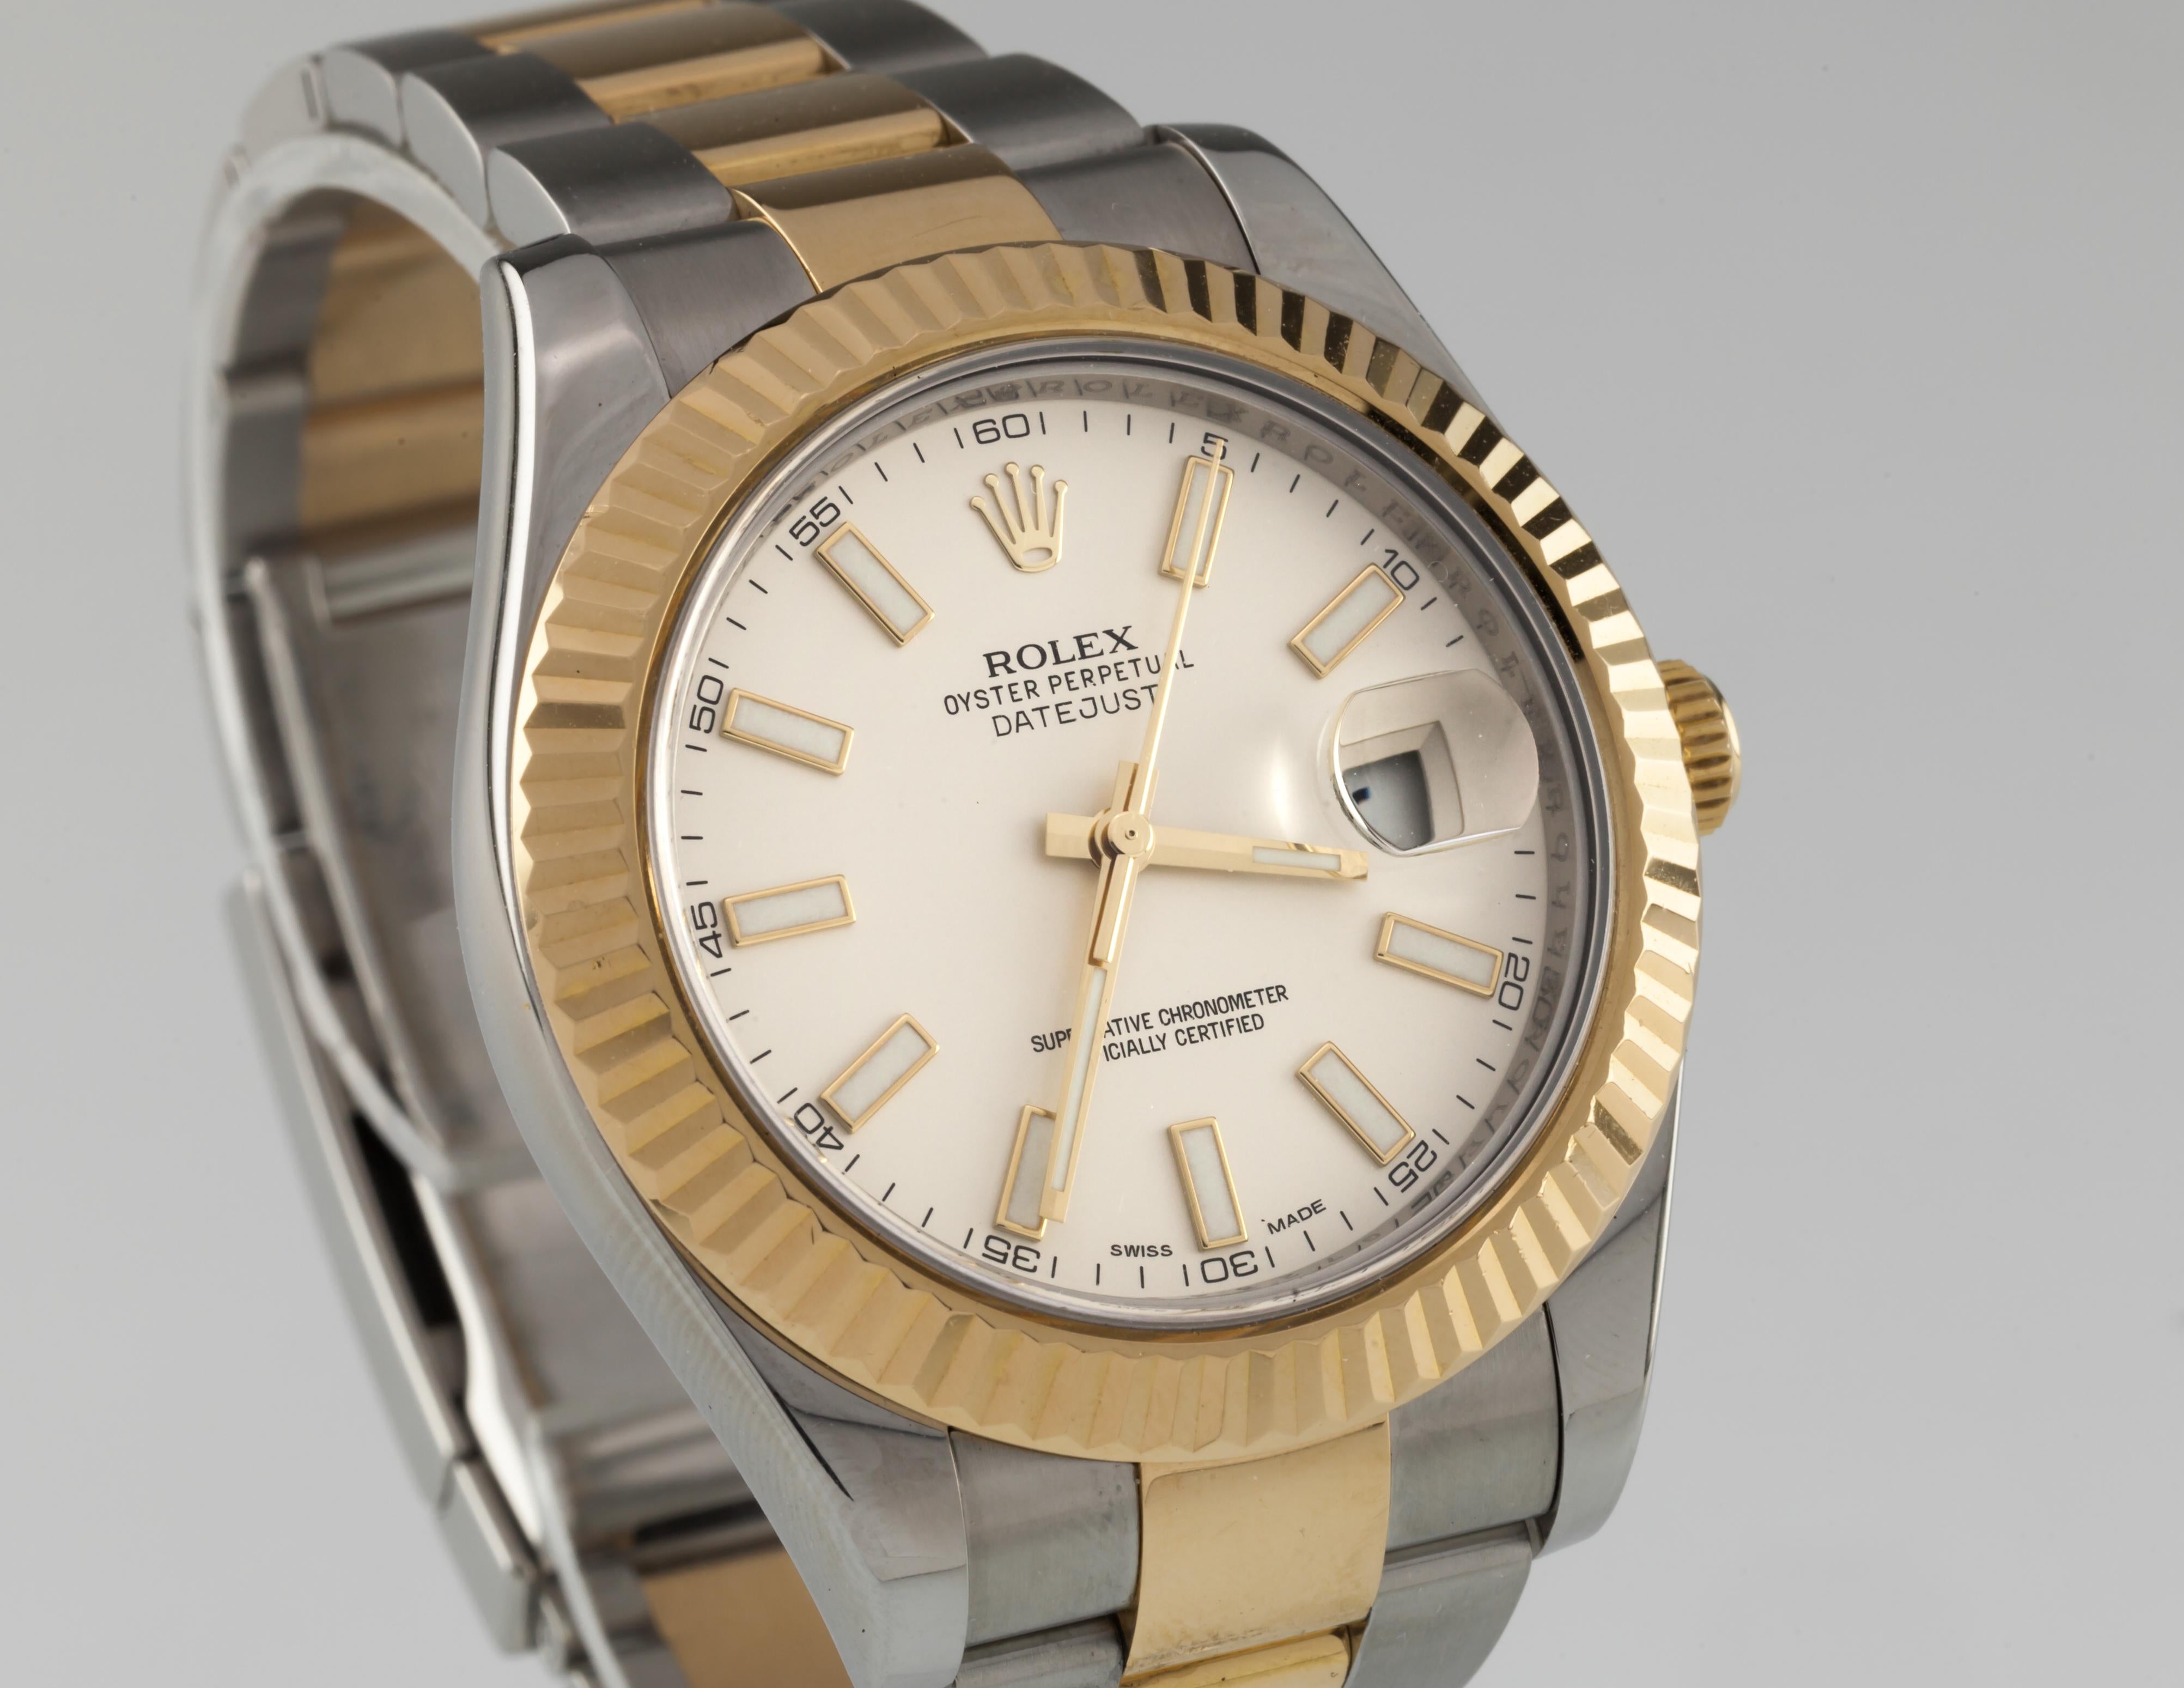 Rolex Two-Tone 18k Gold + Stainless Men's OPDJ 116333 Automatic Watch 2010 In Good Condition For Sale In Sherman Oaks, CA